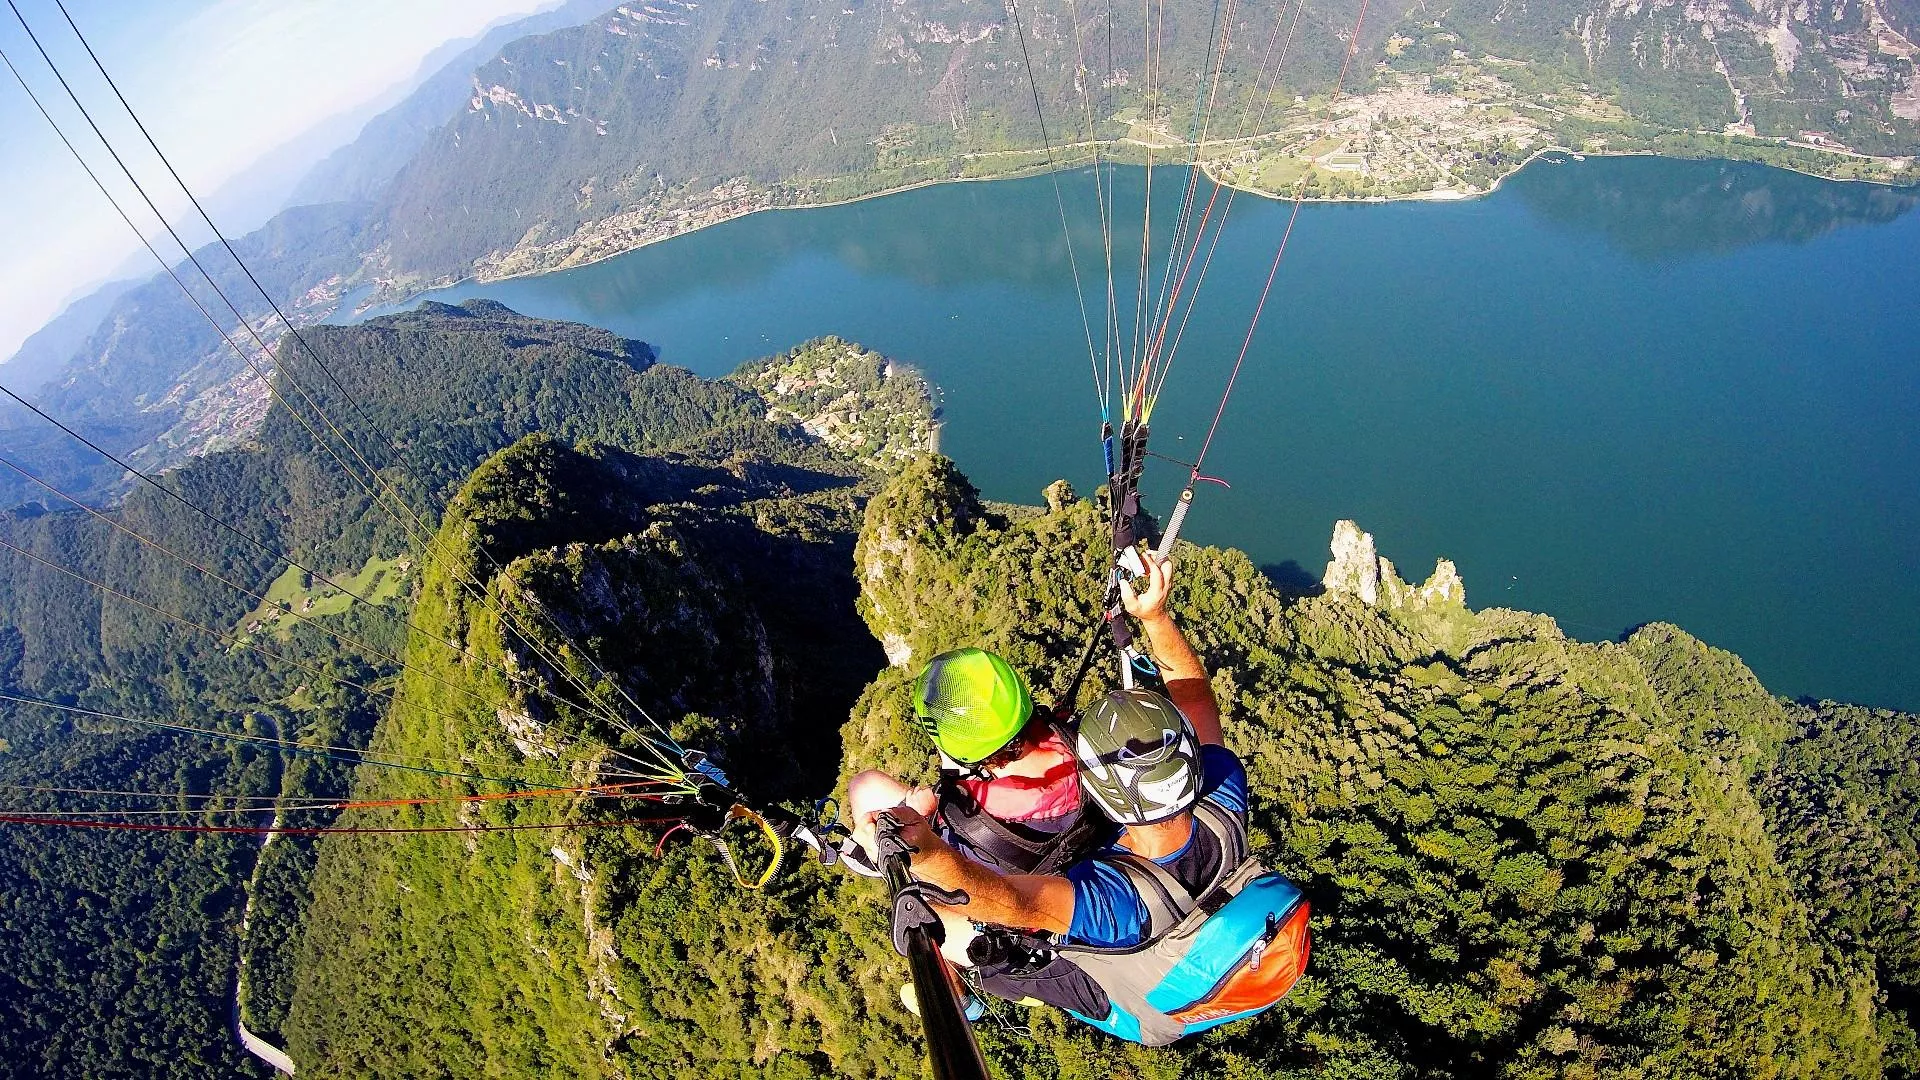 Fly2Fun Tandem Paragliding in Italy, Europe | Paragliding - Rated 1.1